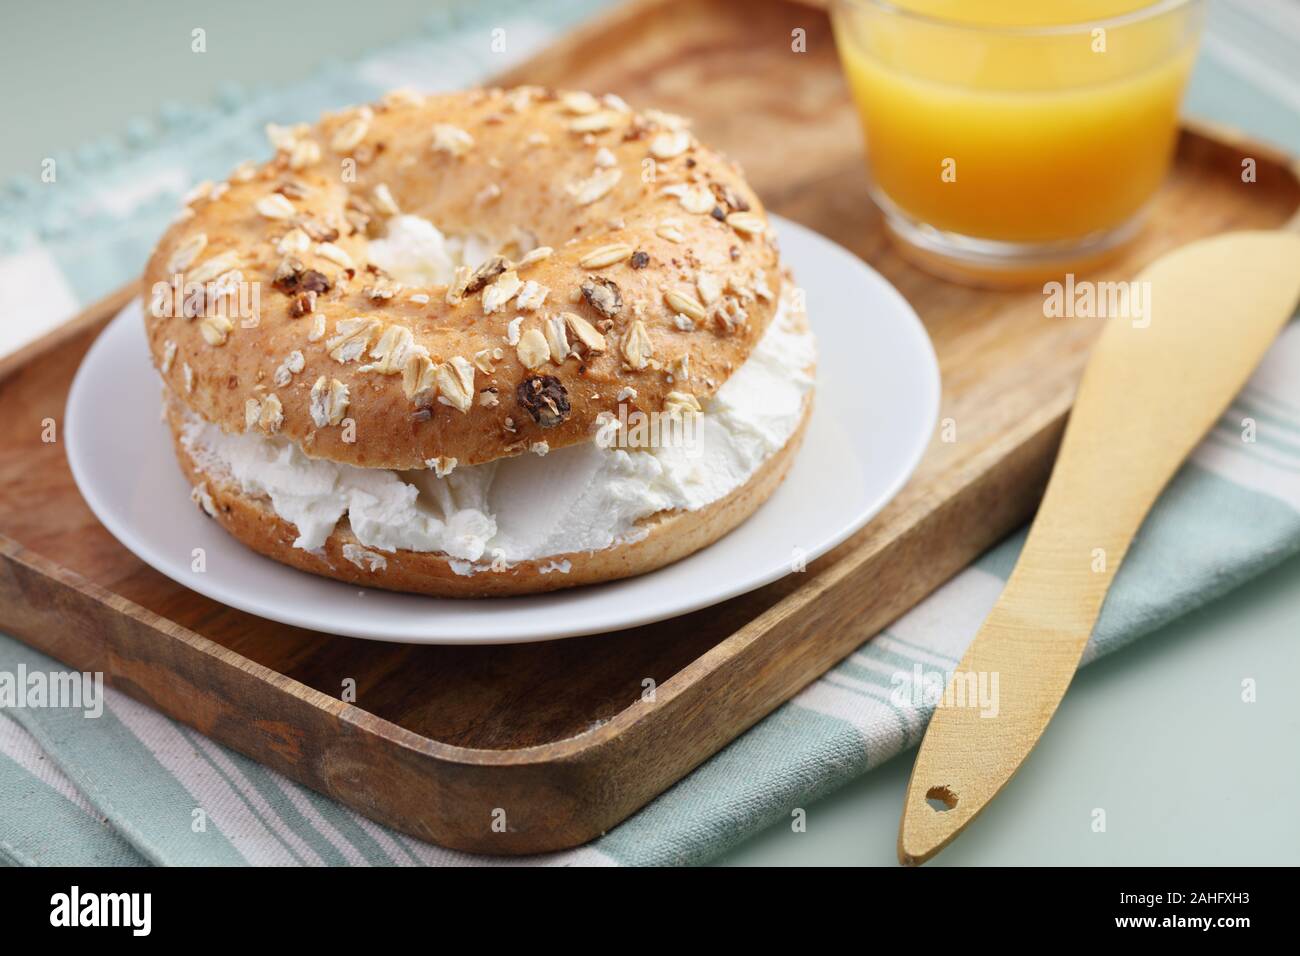 Bagel sandwich with soft cheese and a cup of orange juice on a wooden tray Stock Photo